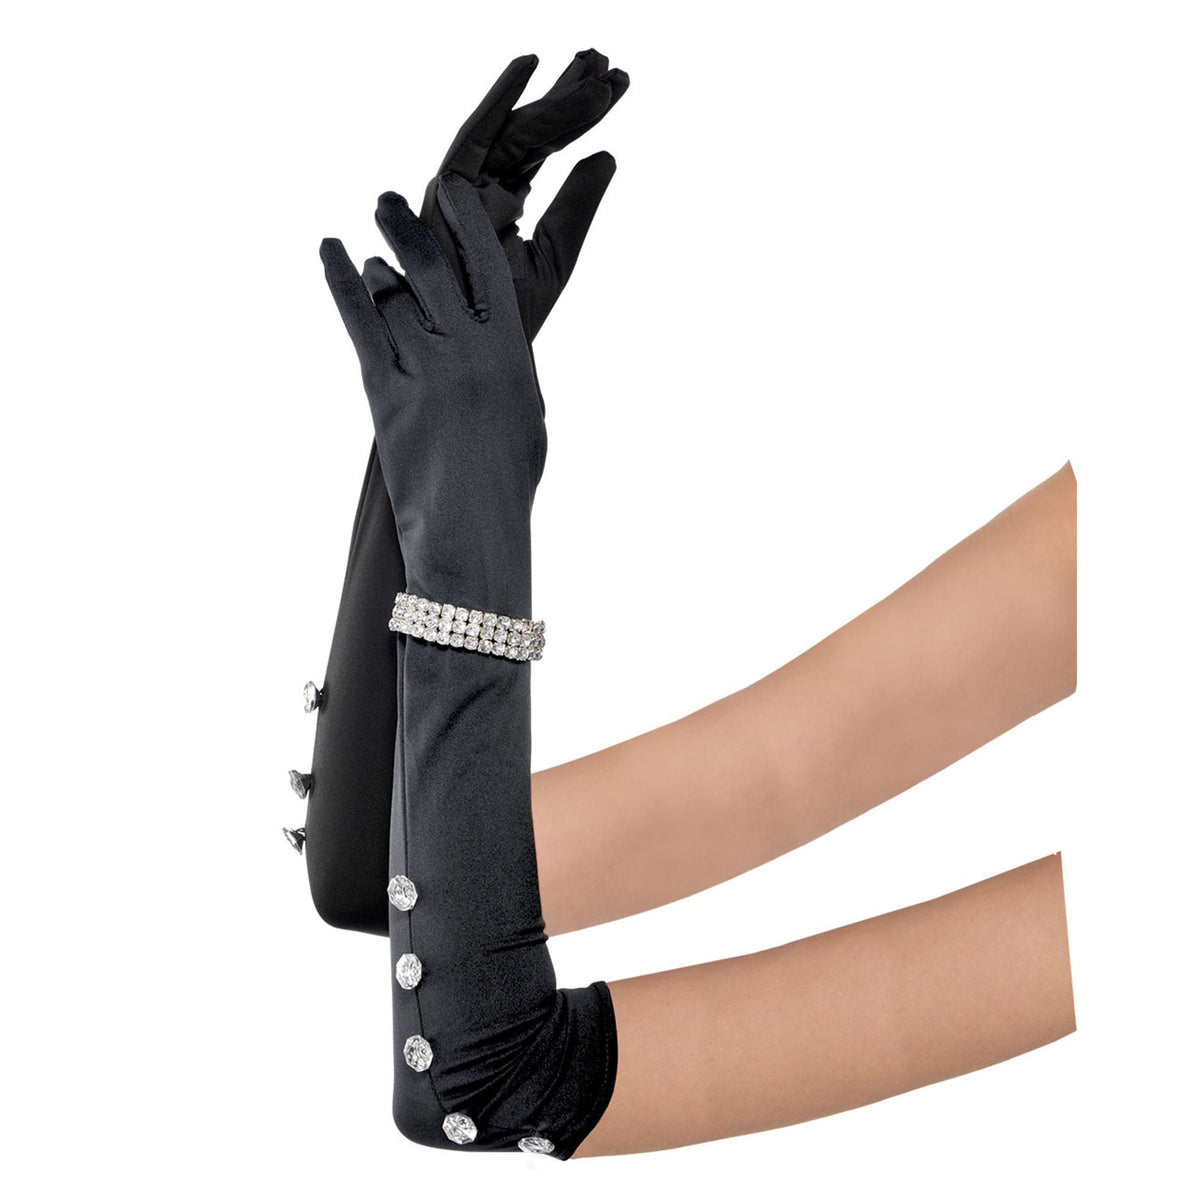 SUIT YOURSELF COSTUME CO. Costume Accessories Long Black Satin Gloves with Rhinestone Bracelet for Adults 809801709606